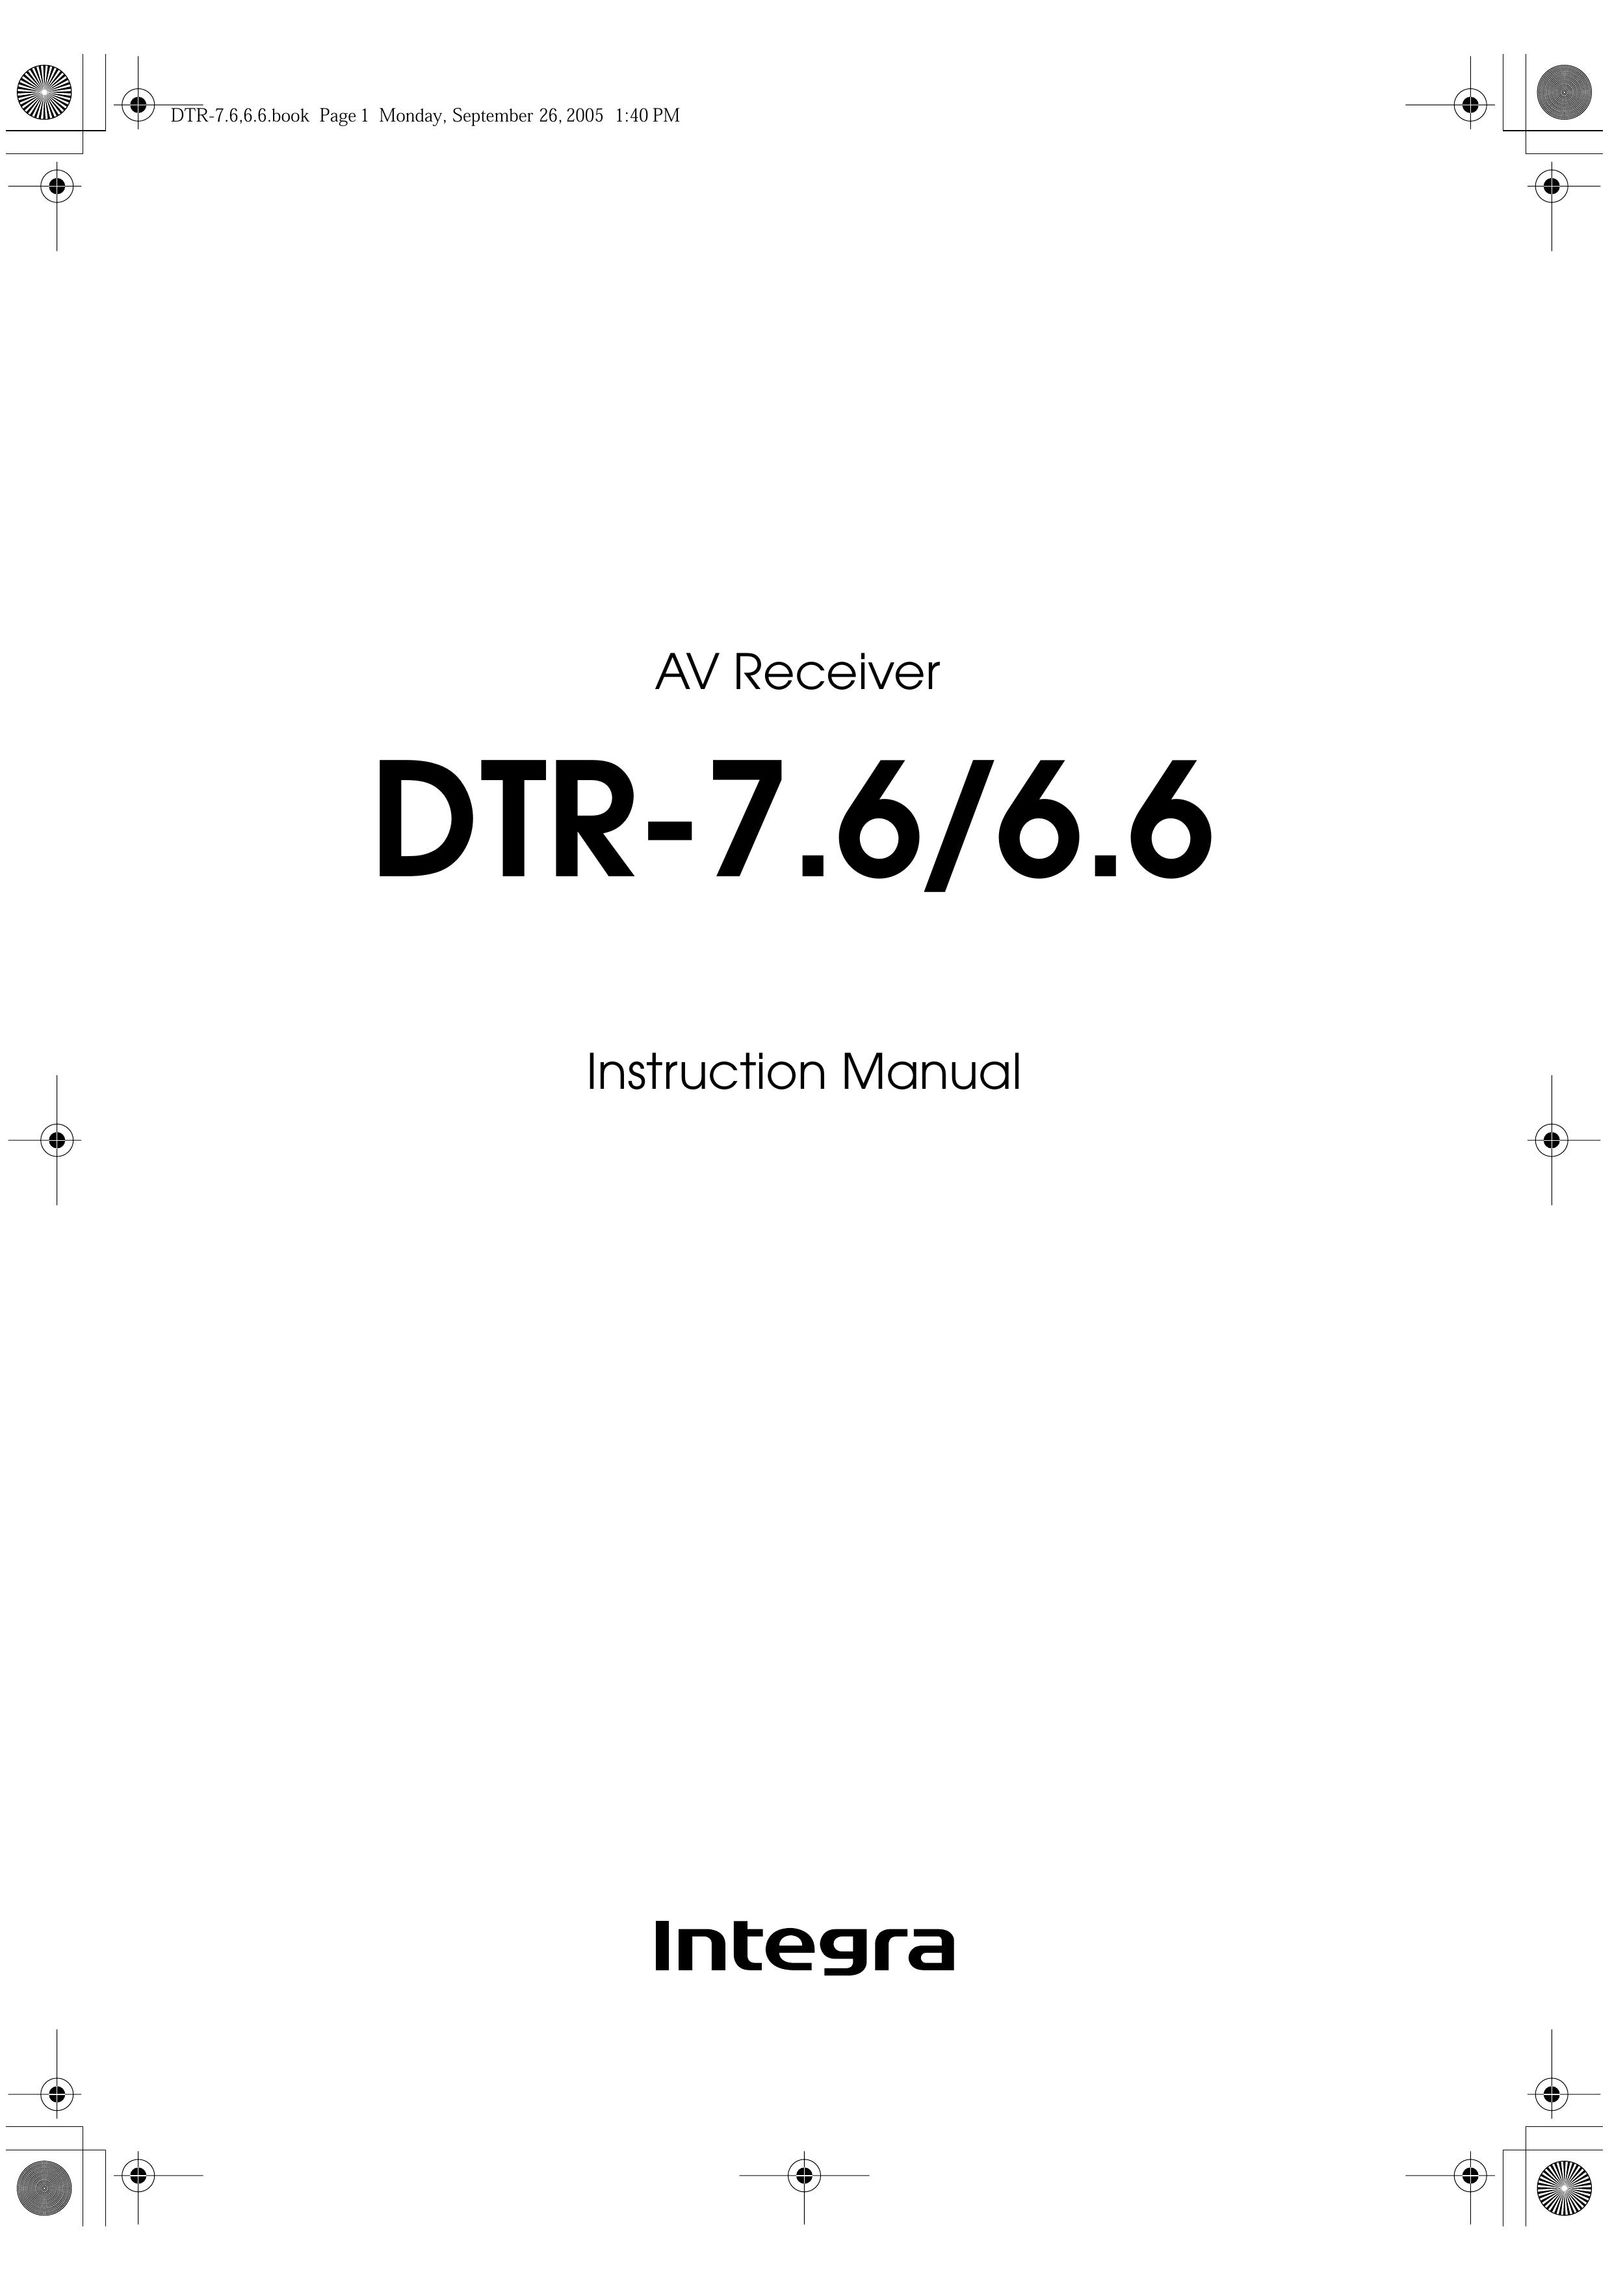 Integra DTR-7.6/6.6 Stereo Receiver User Manual (Page 1)